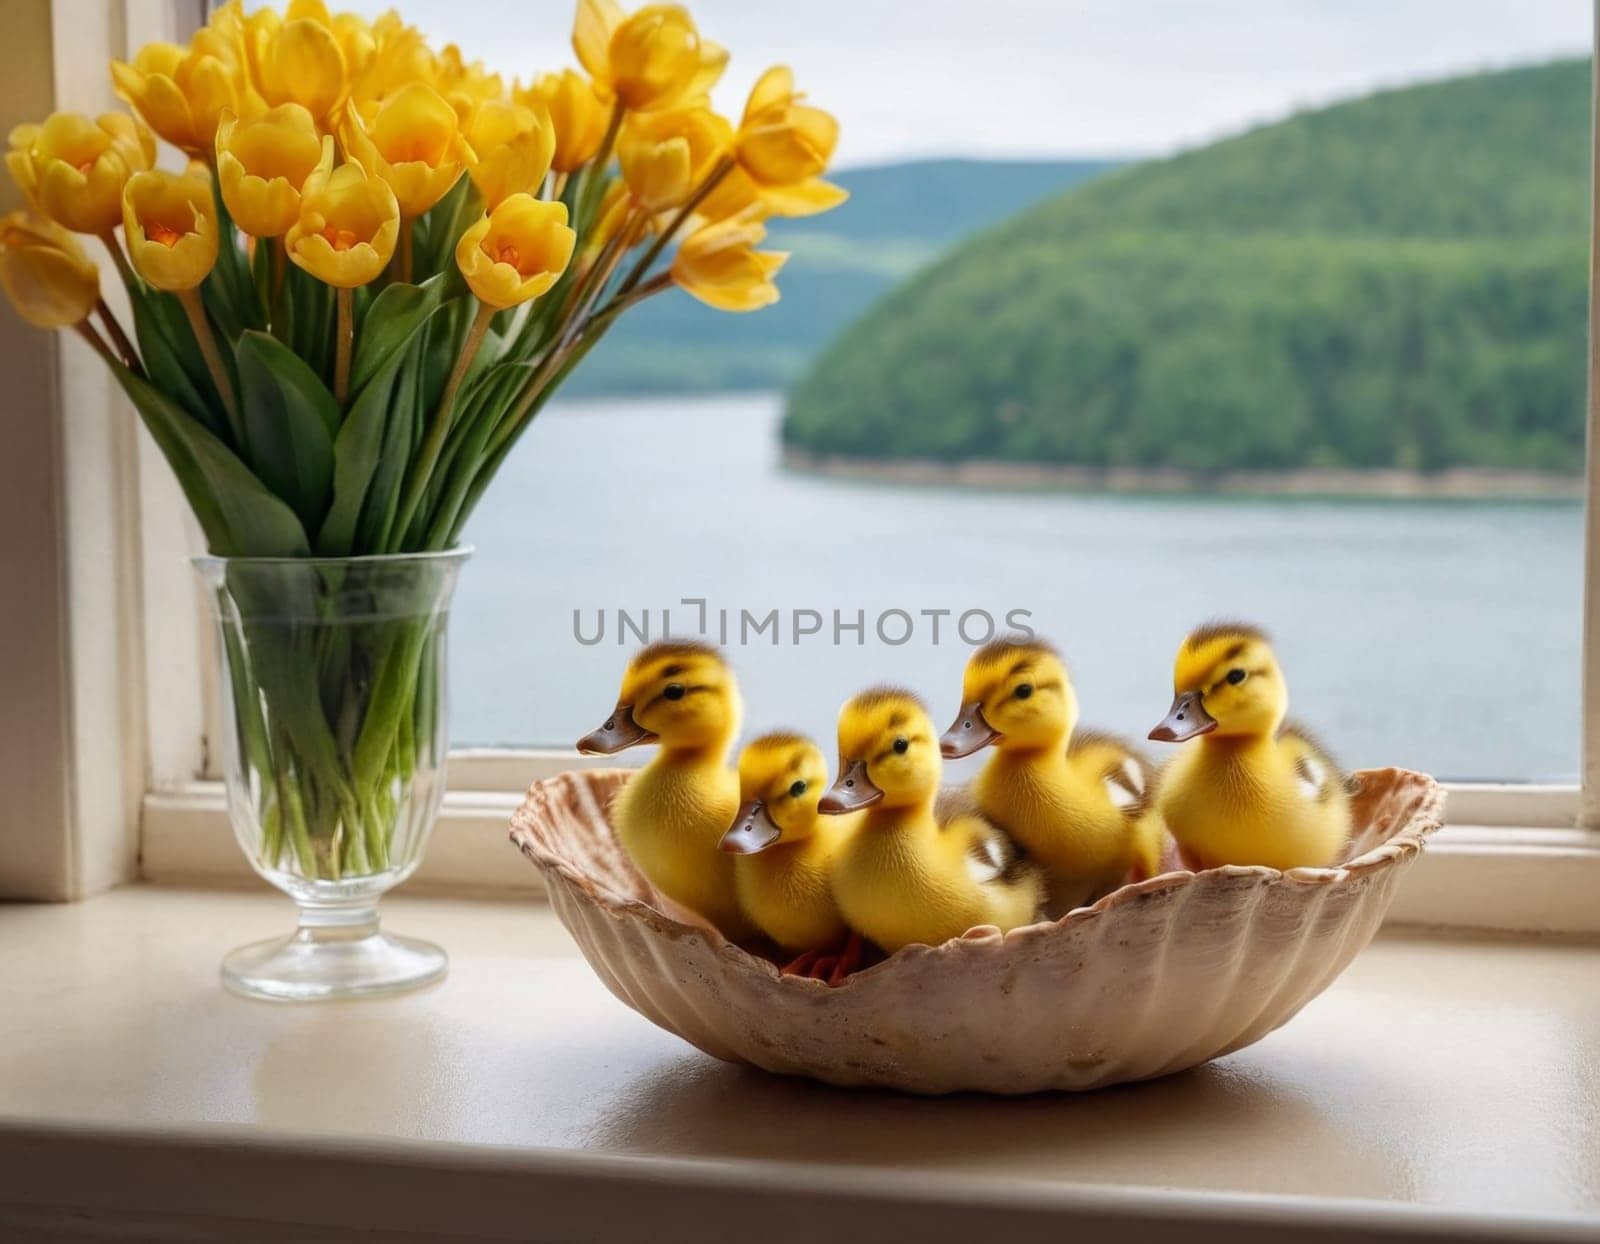 Three baby ducks are sitting in a bowl on a window sill by vicnt